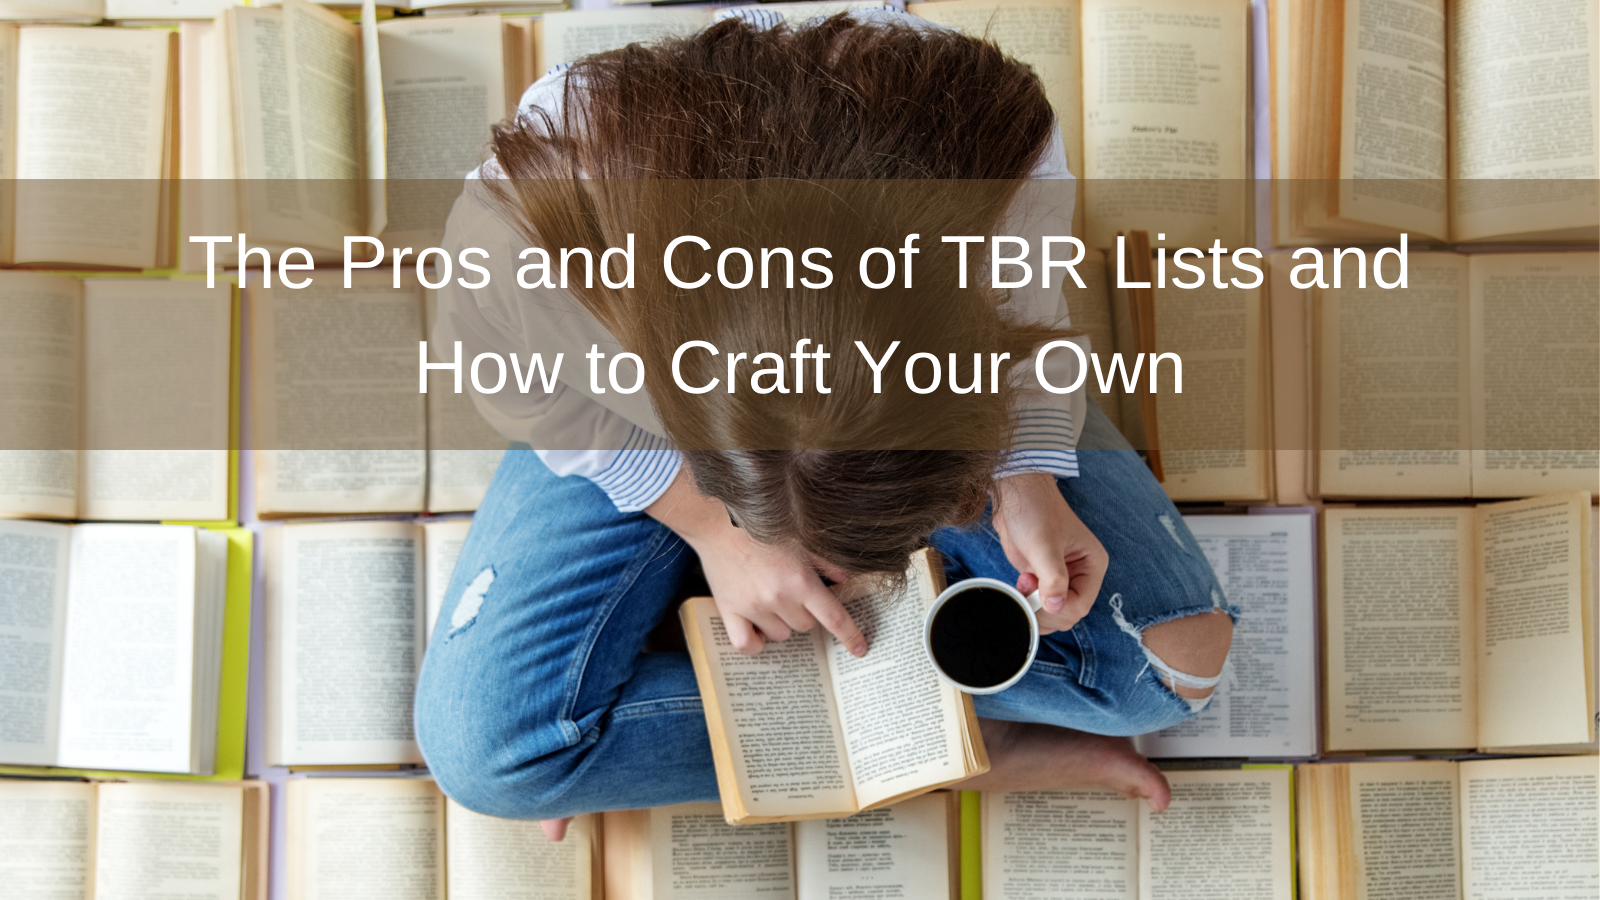 The Pros and Cons of TBR Lists